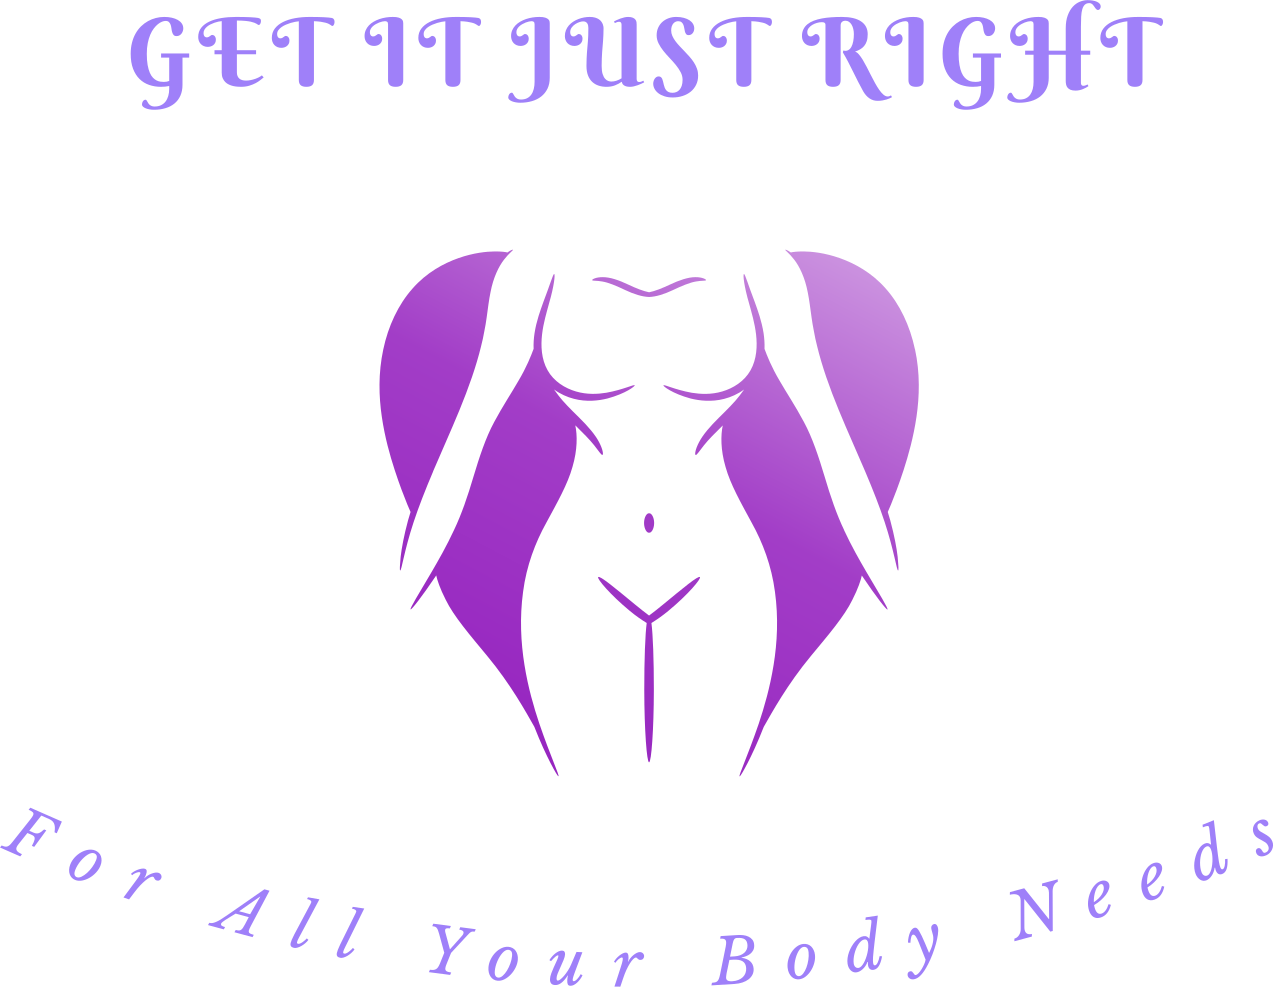 GET IT JUST RIGHT's logo